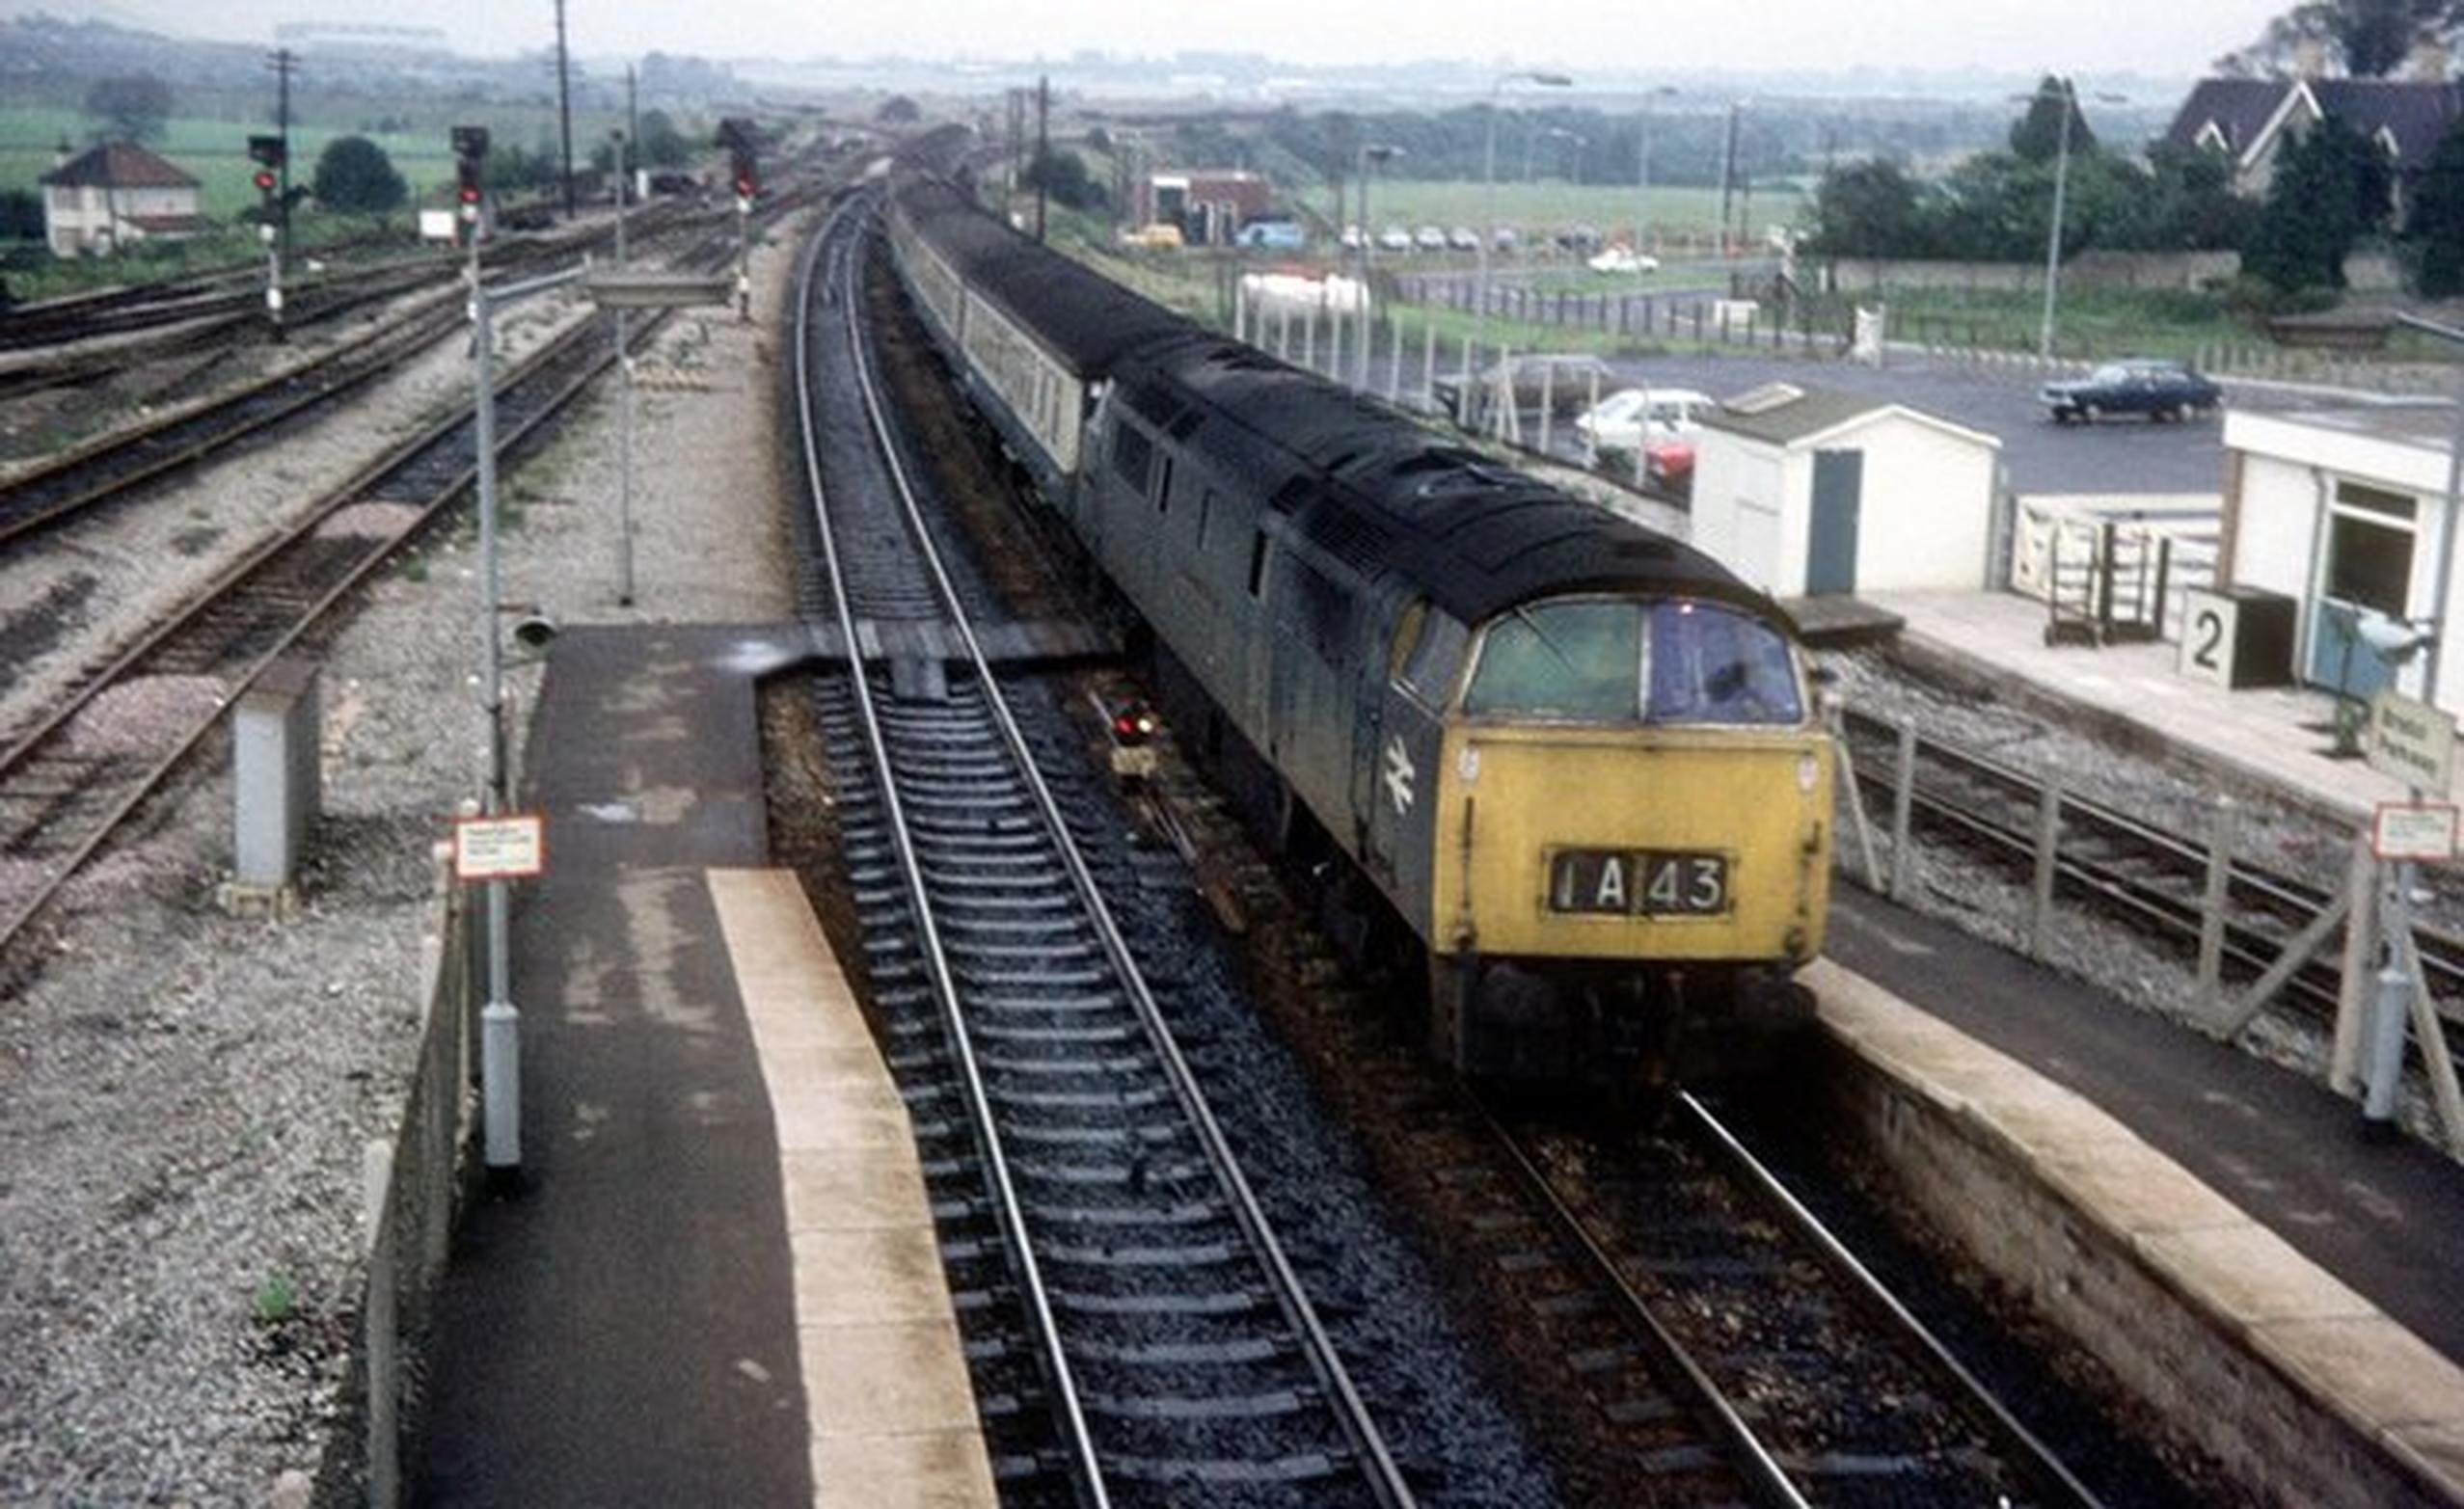 Bristol Parkway in the beginning (Geograph)